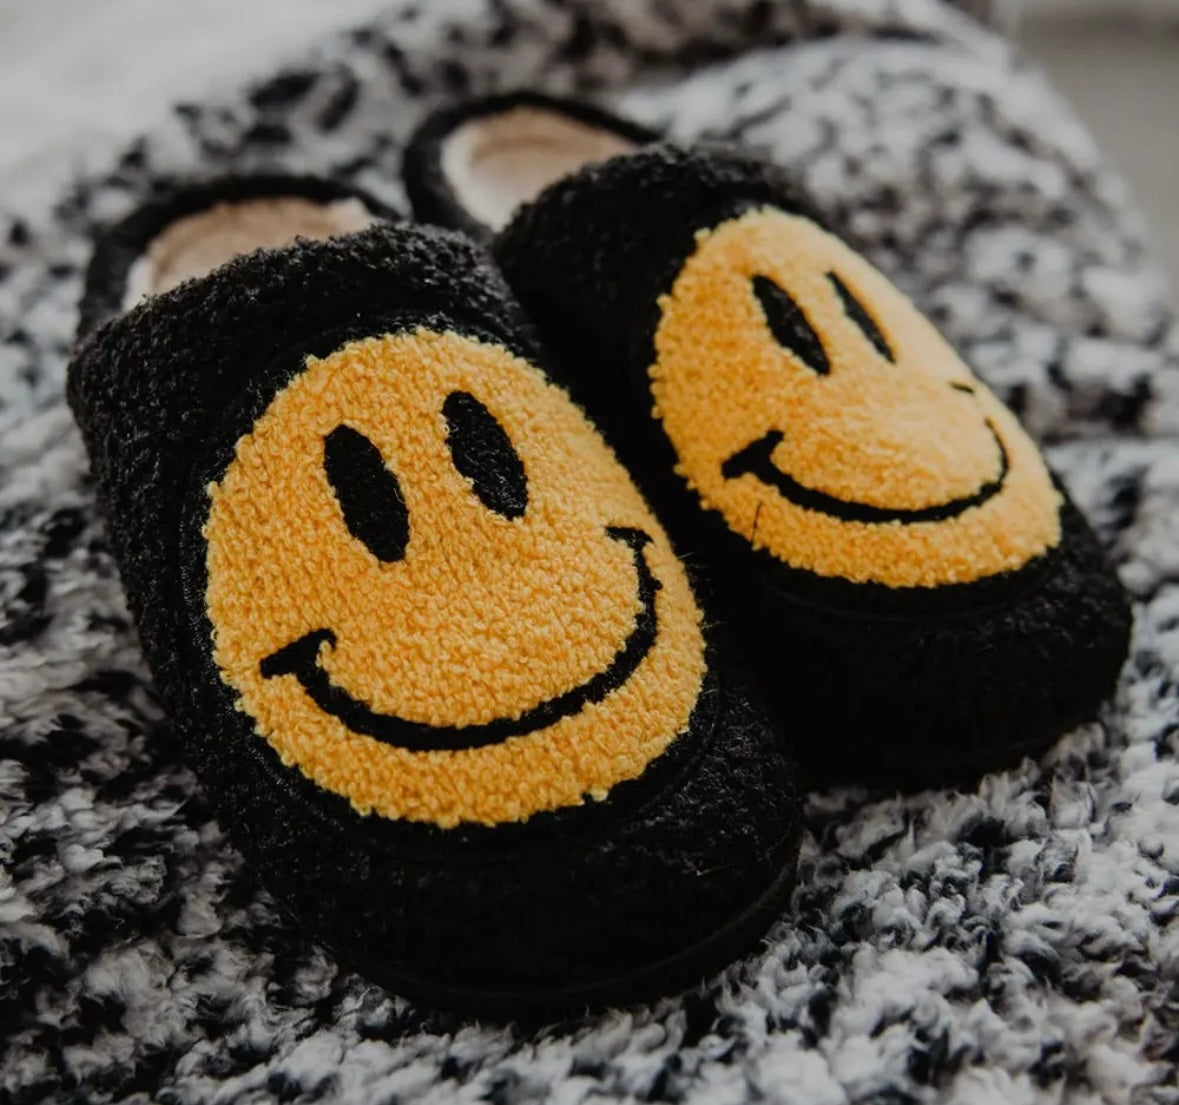 Black Happy Face Slippers